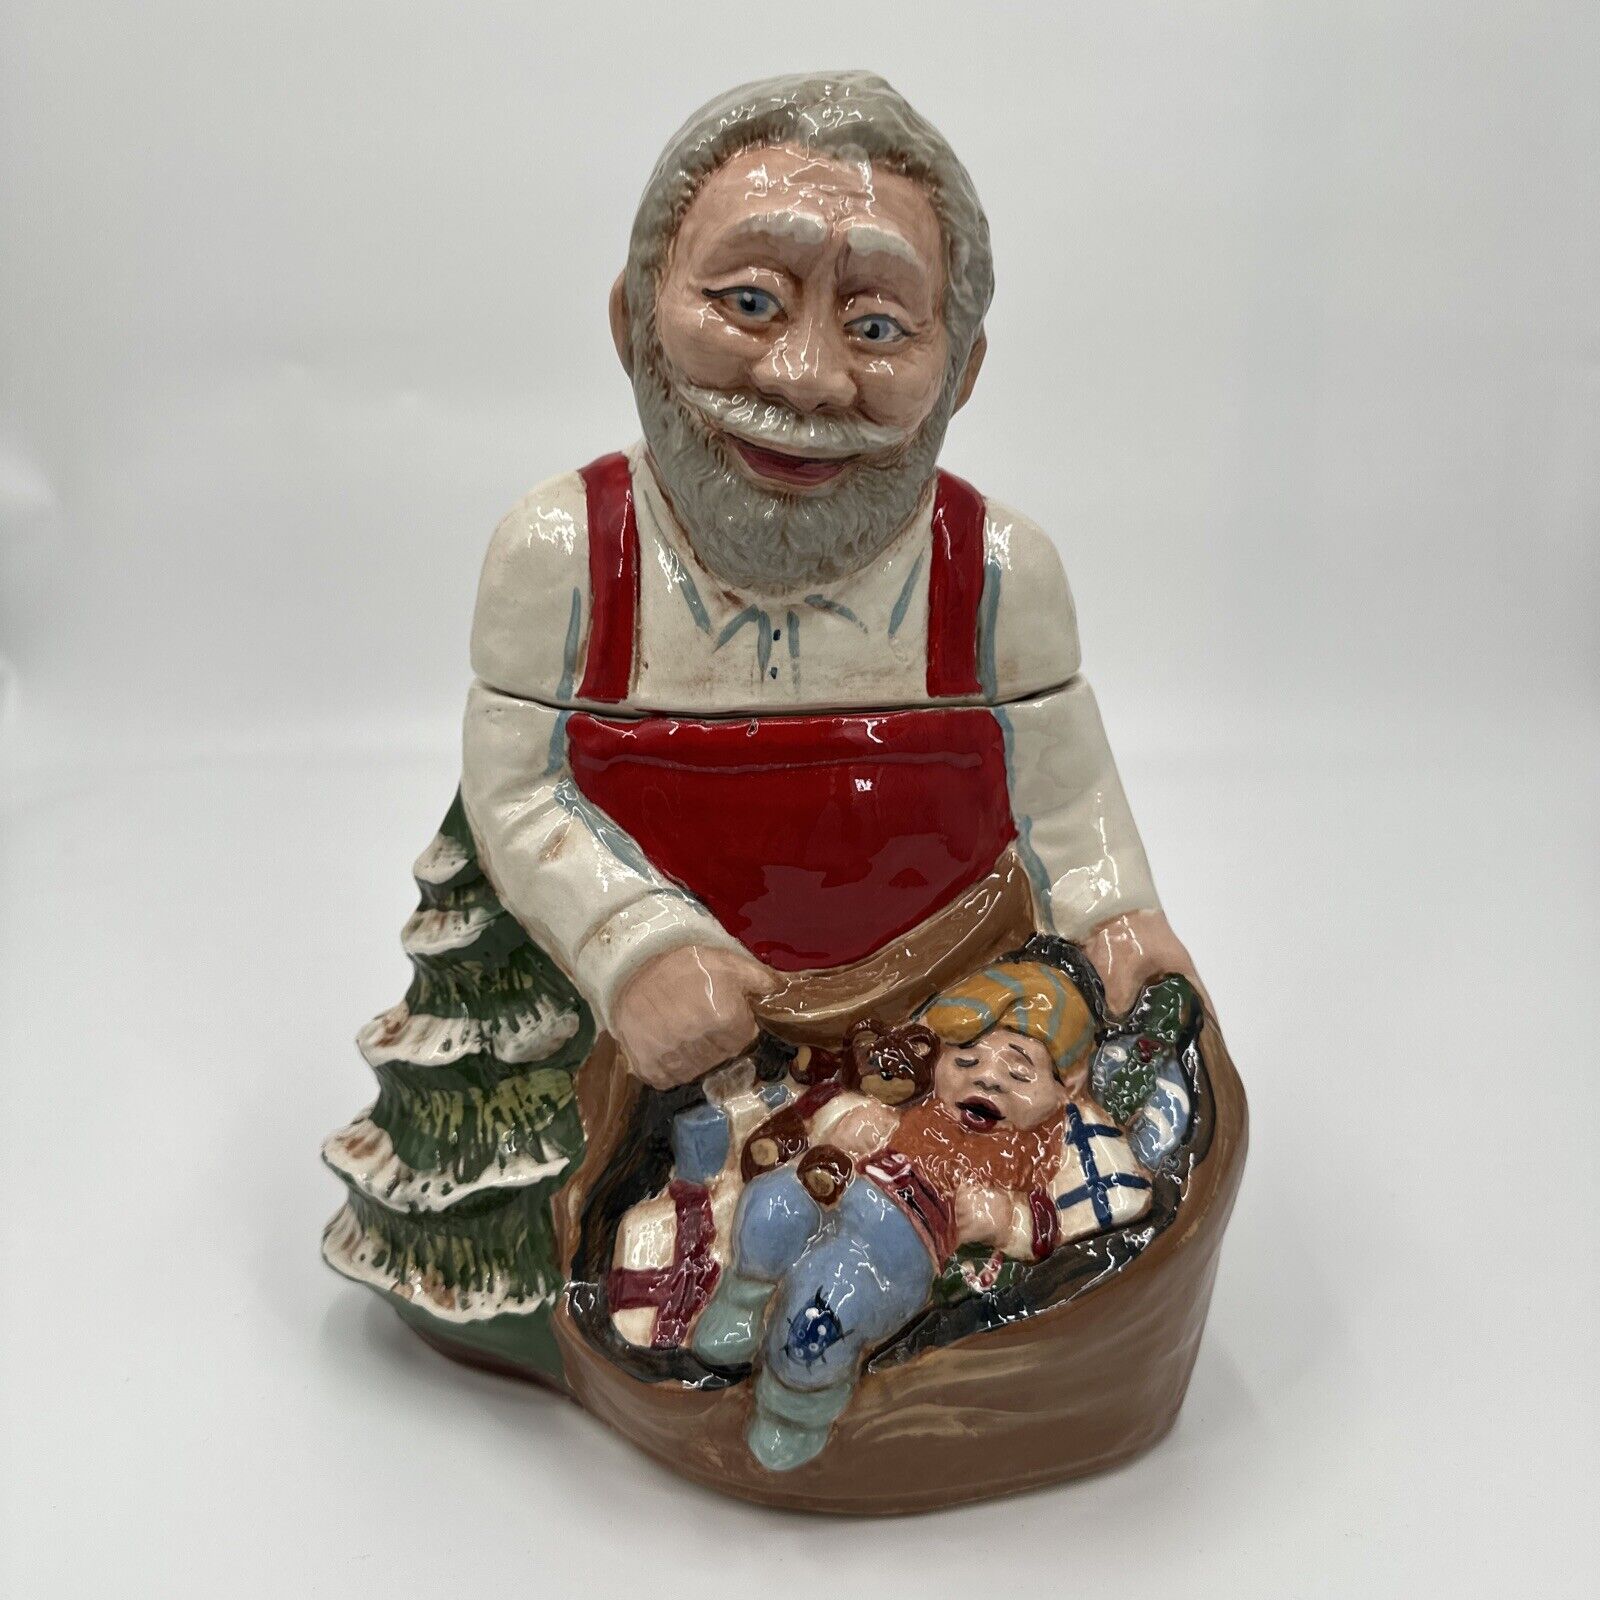 1990 Signed Rick Wisecarver Pottery Hand Painted Santa Clause Cookie Jar